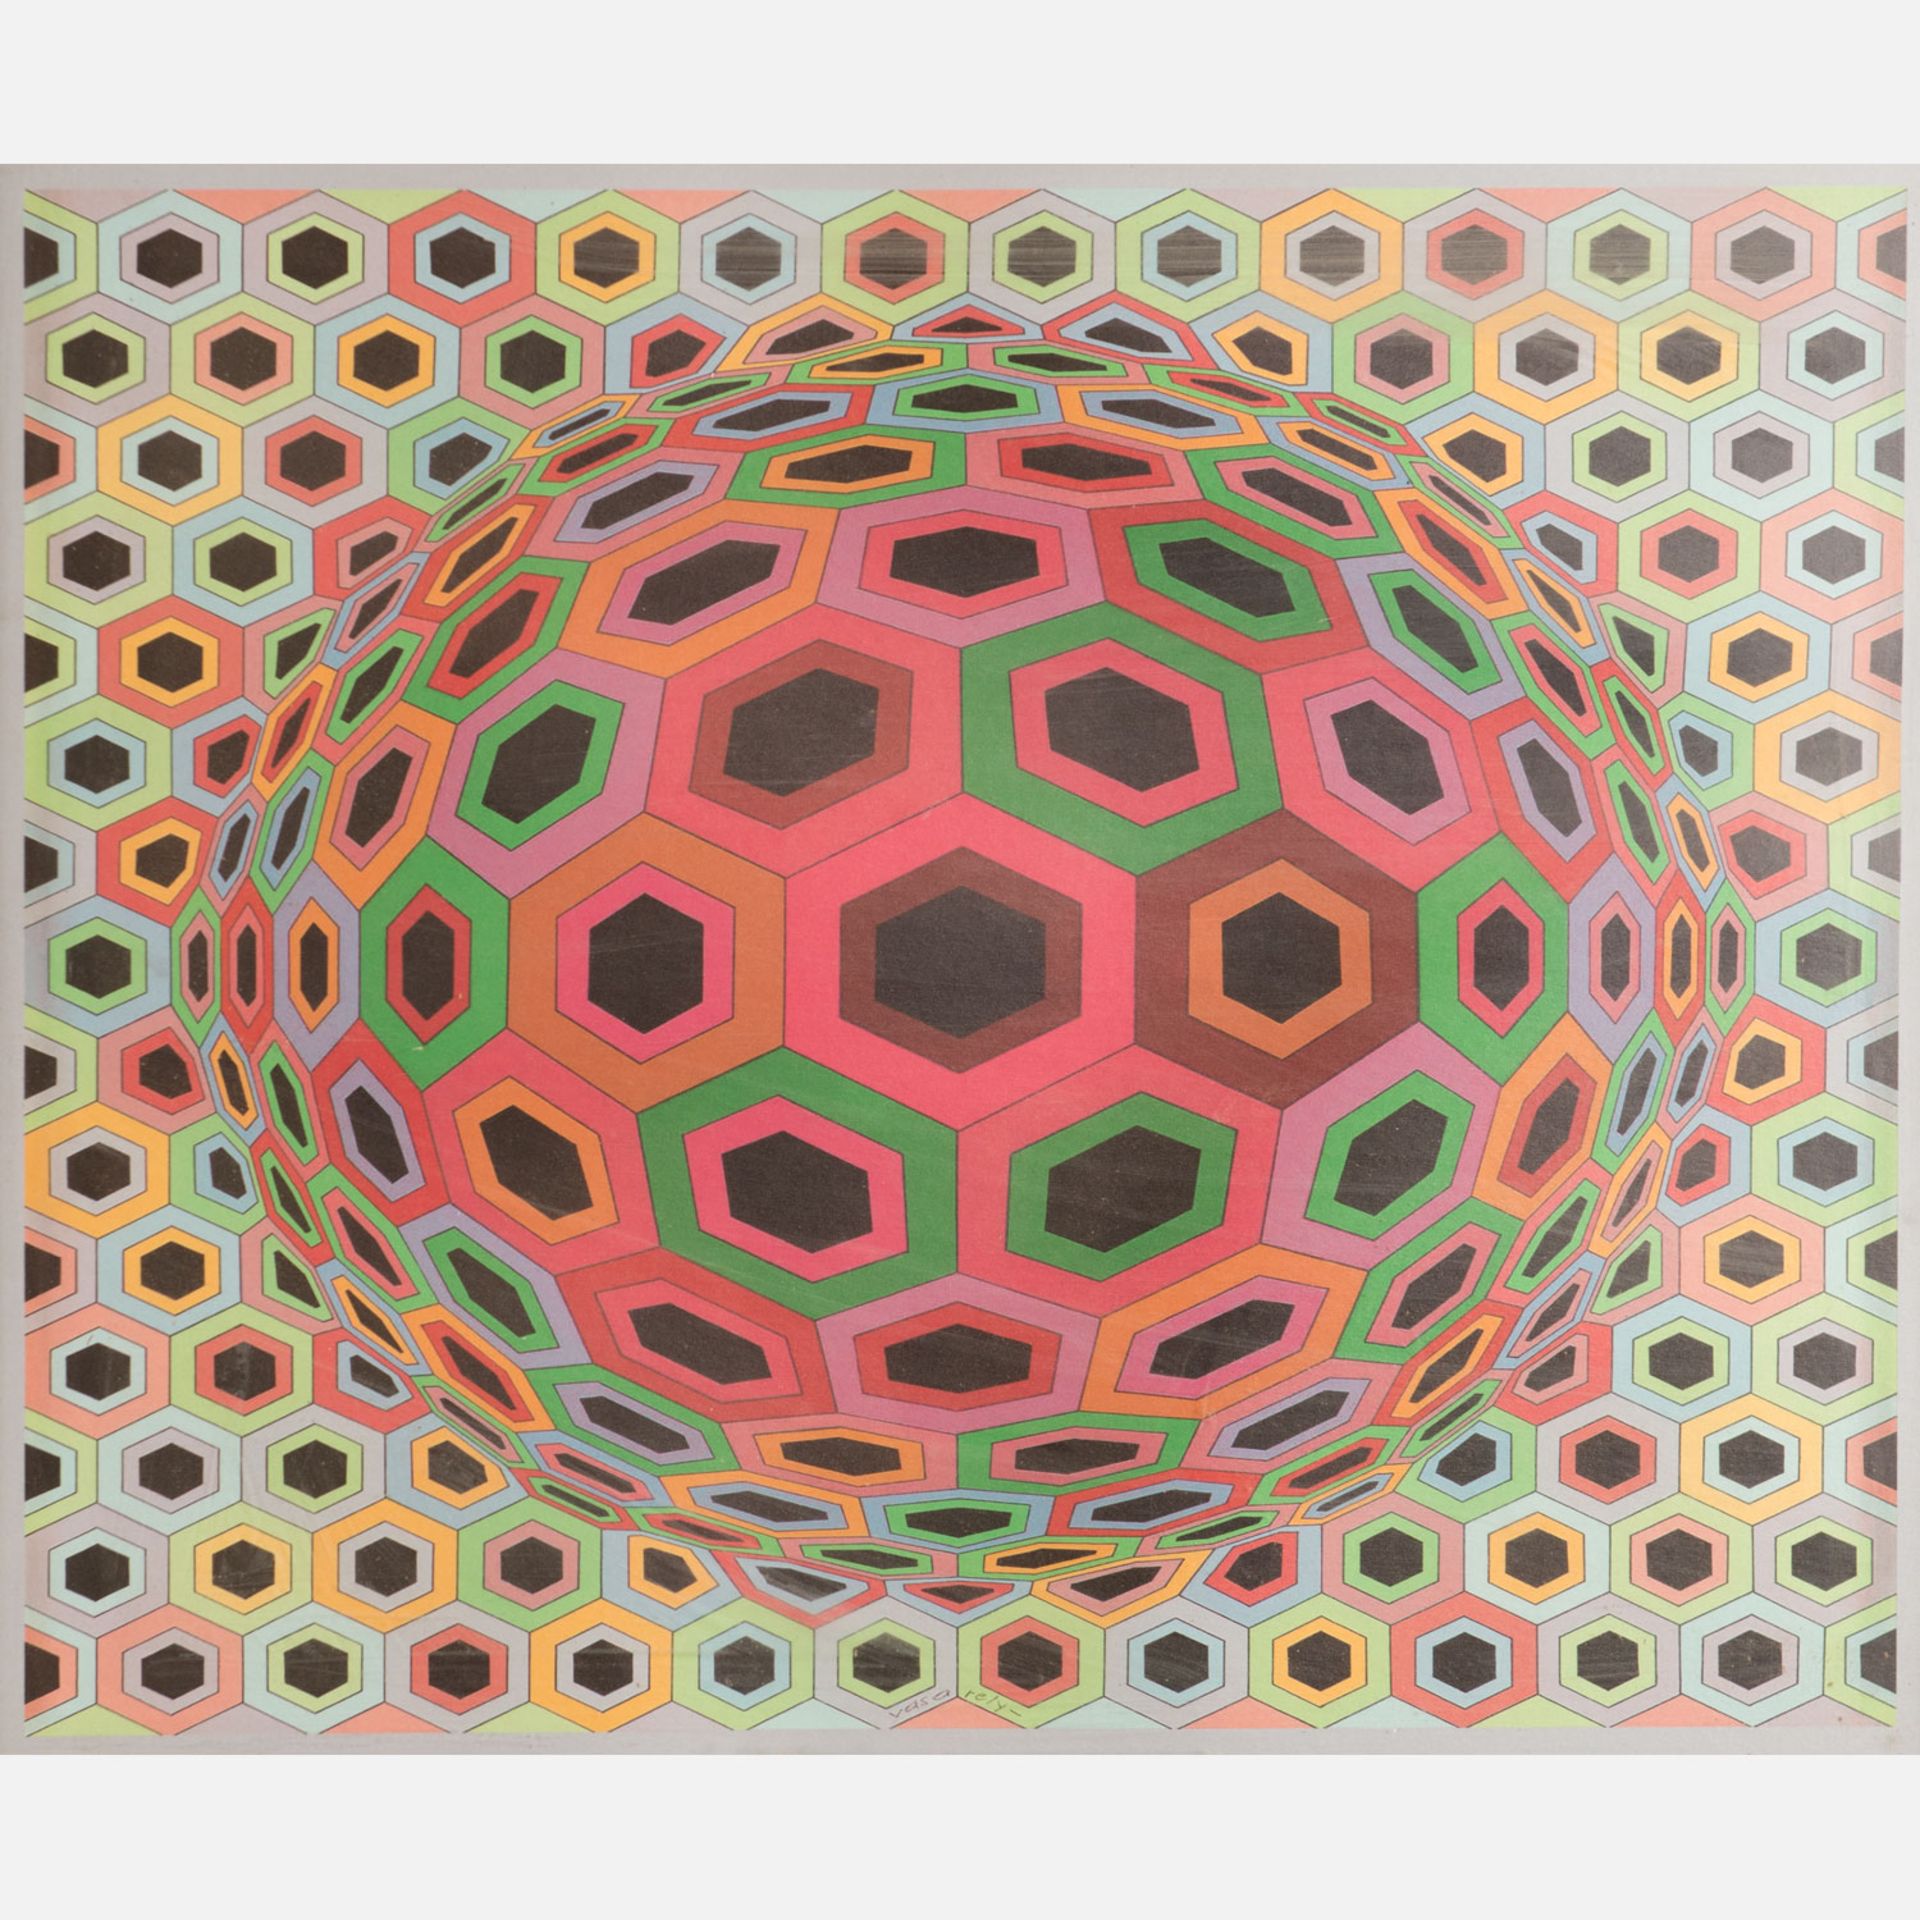 Victor Vasarely (1906-1997)-graphic - Image 2 of 3